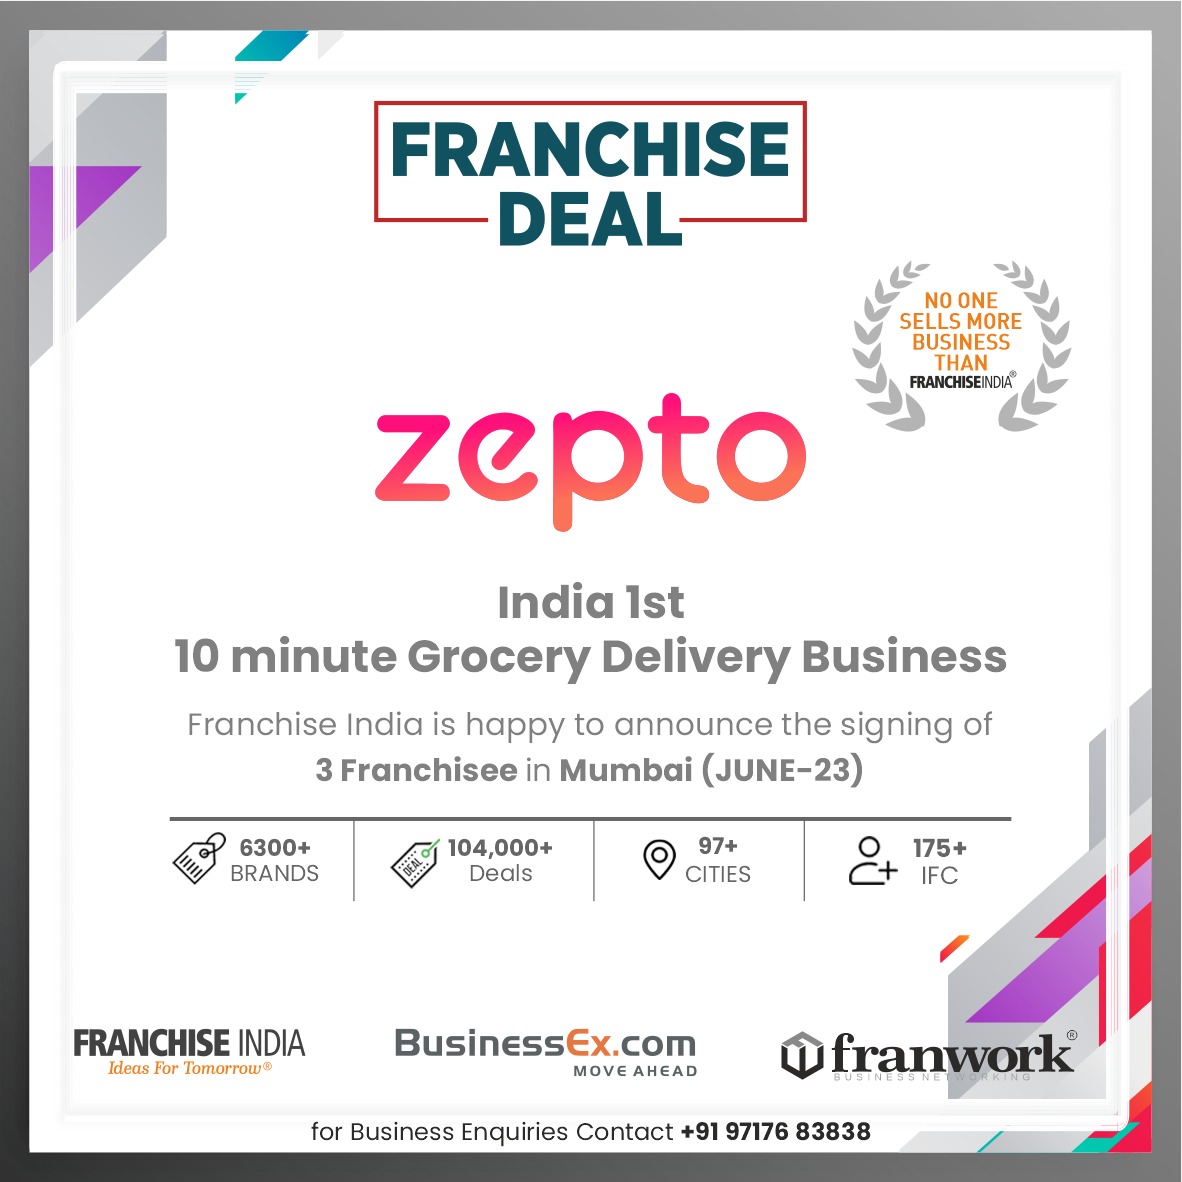 Heartiest Congratulations to @Zeptonow Cares for signing 3 New #Franchisees in #Mumbai.  

#Franchiseconsultant_ #franchiseopportunities #franchises #franchiseforsale #franchisesforsale #franchiseinindia #franchisebusinesses #franchiseopportunitiesinindia #franchisecompany…